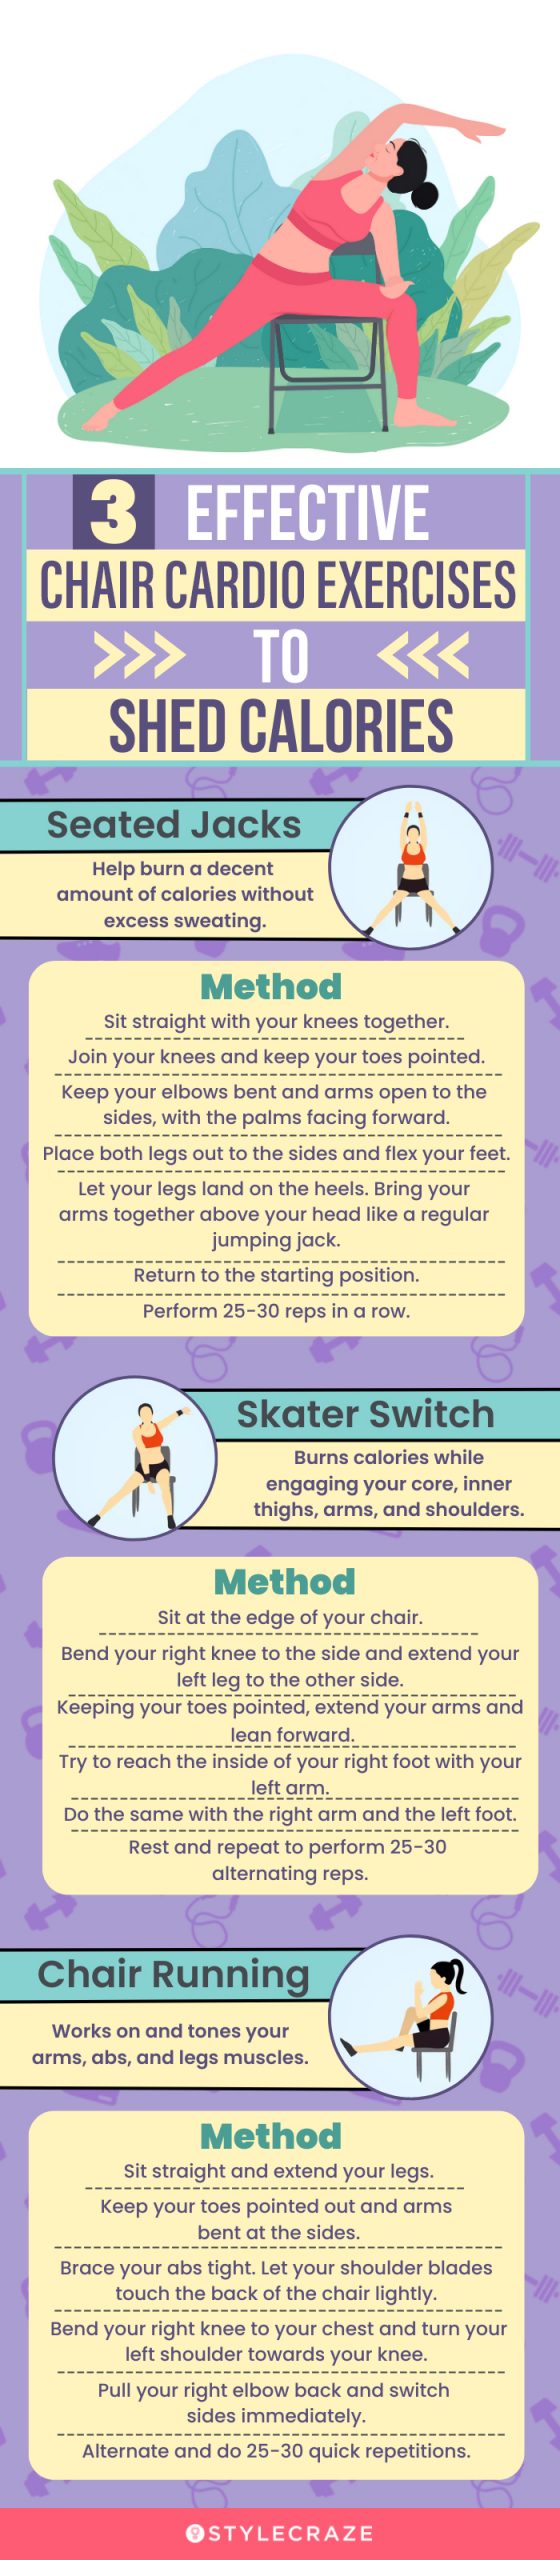 3 effective cardio exercises to shed calories (infographic)